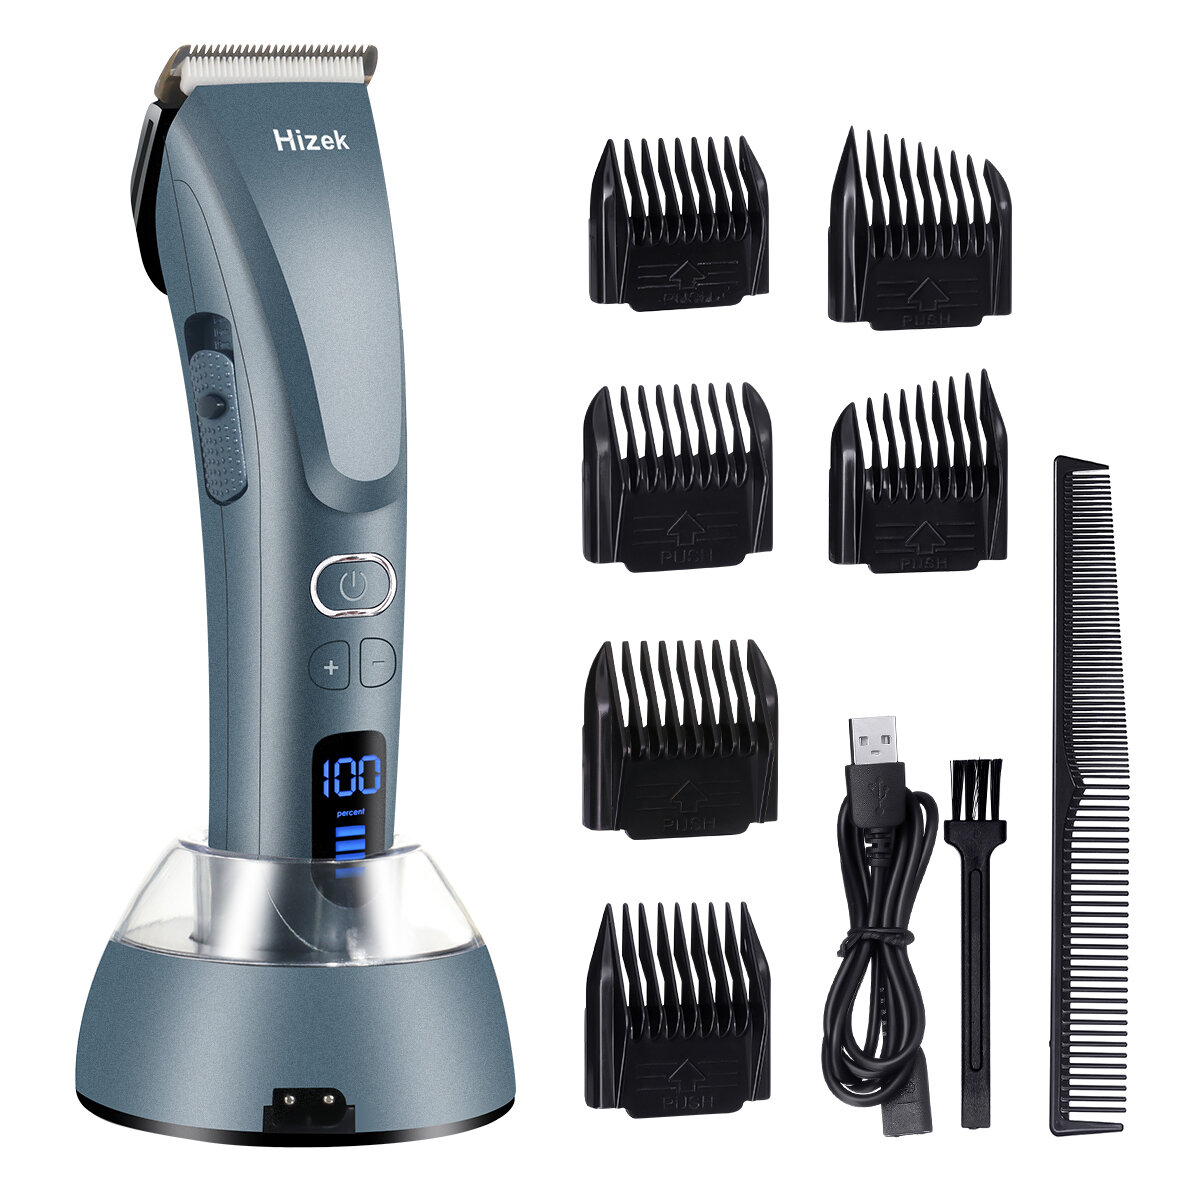 Image of Hair Clippers for MenHizek Beard Trimmer Professional Cordless Hair Trimmer with 3 Adjustable SpeedsLED DisplayUSB Ch